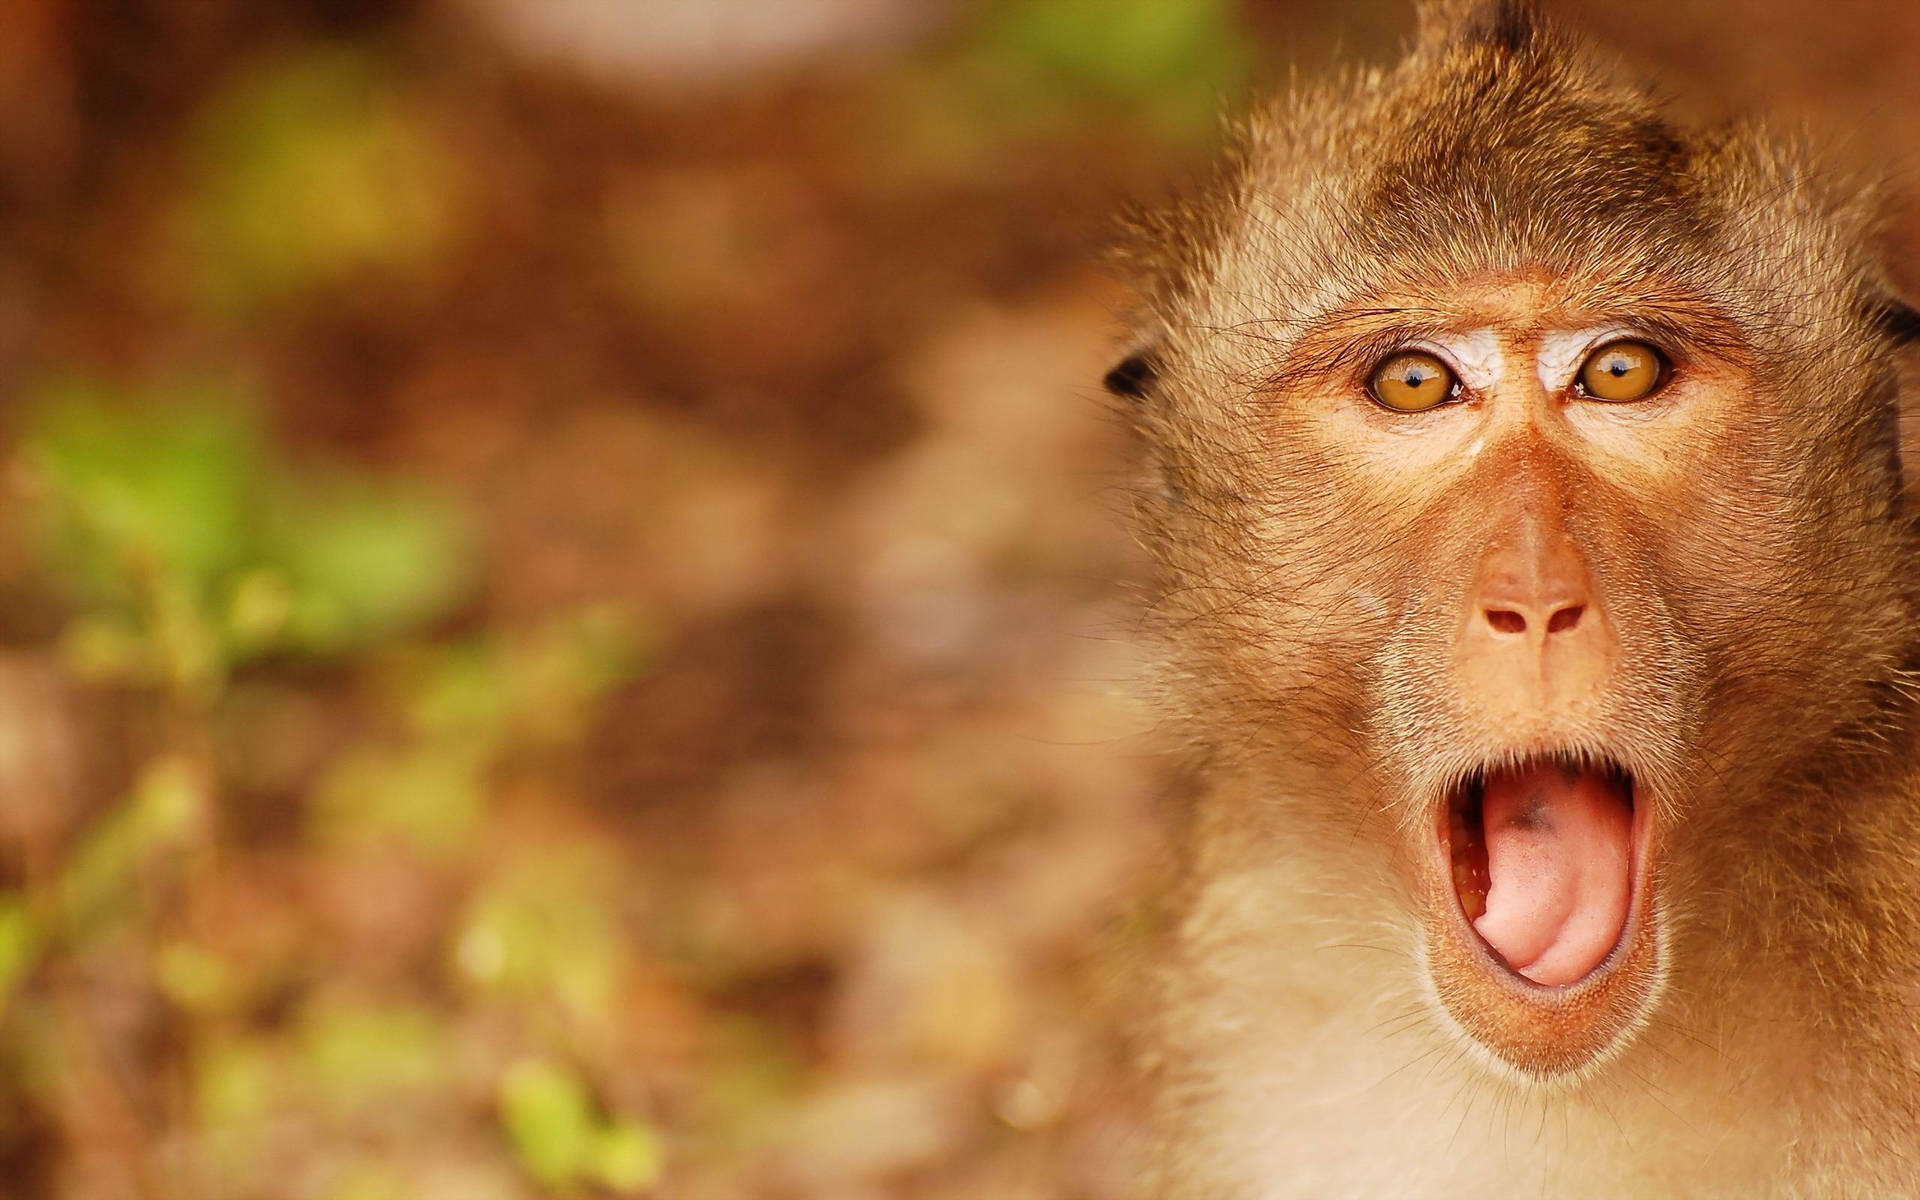 Funny Monkey Tongue Out Wallpaper